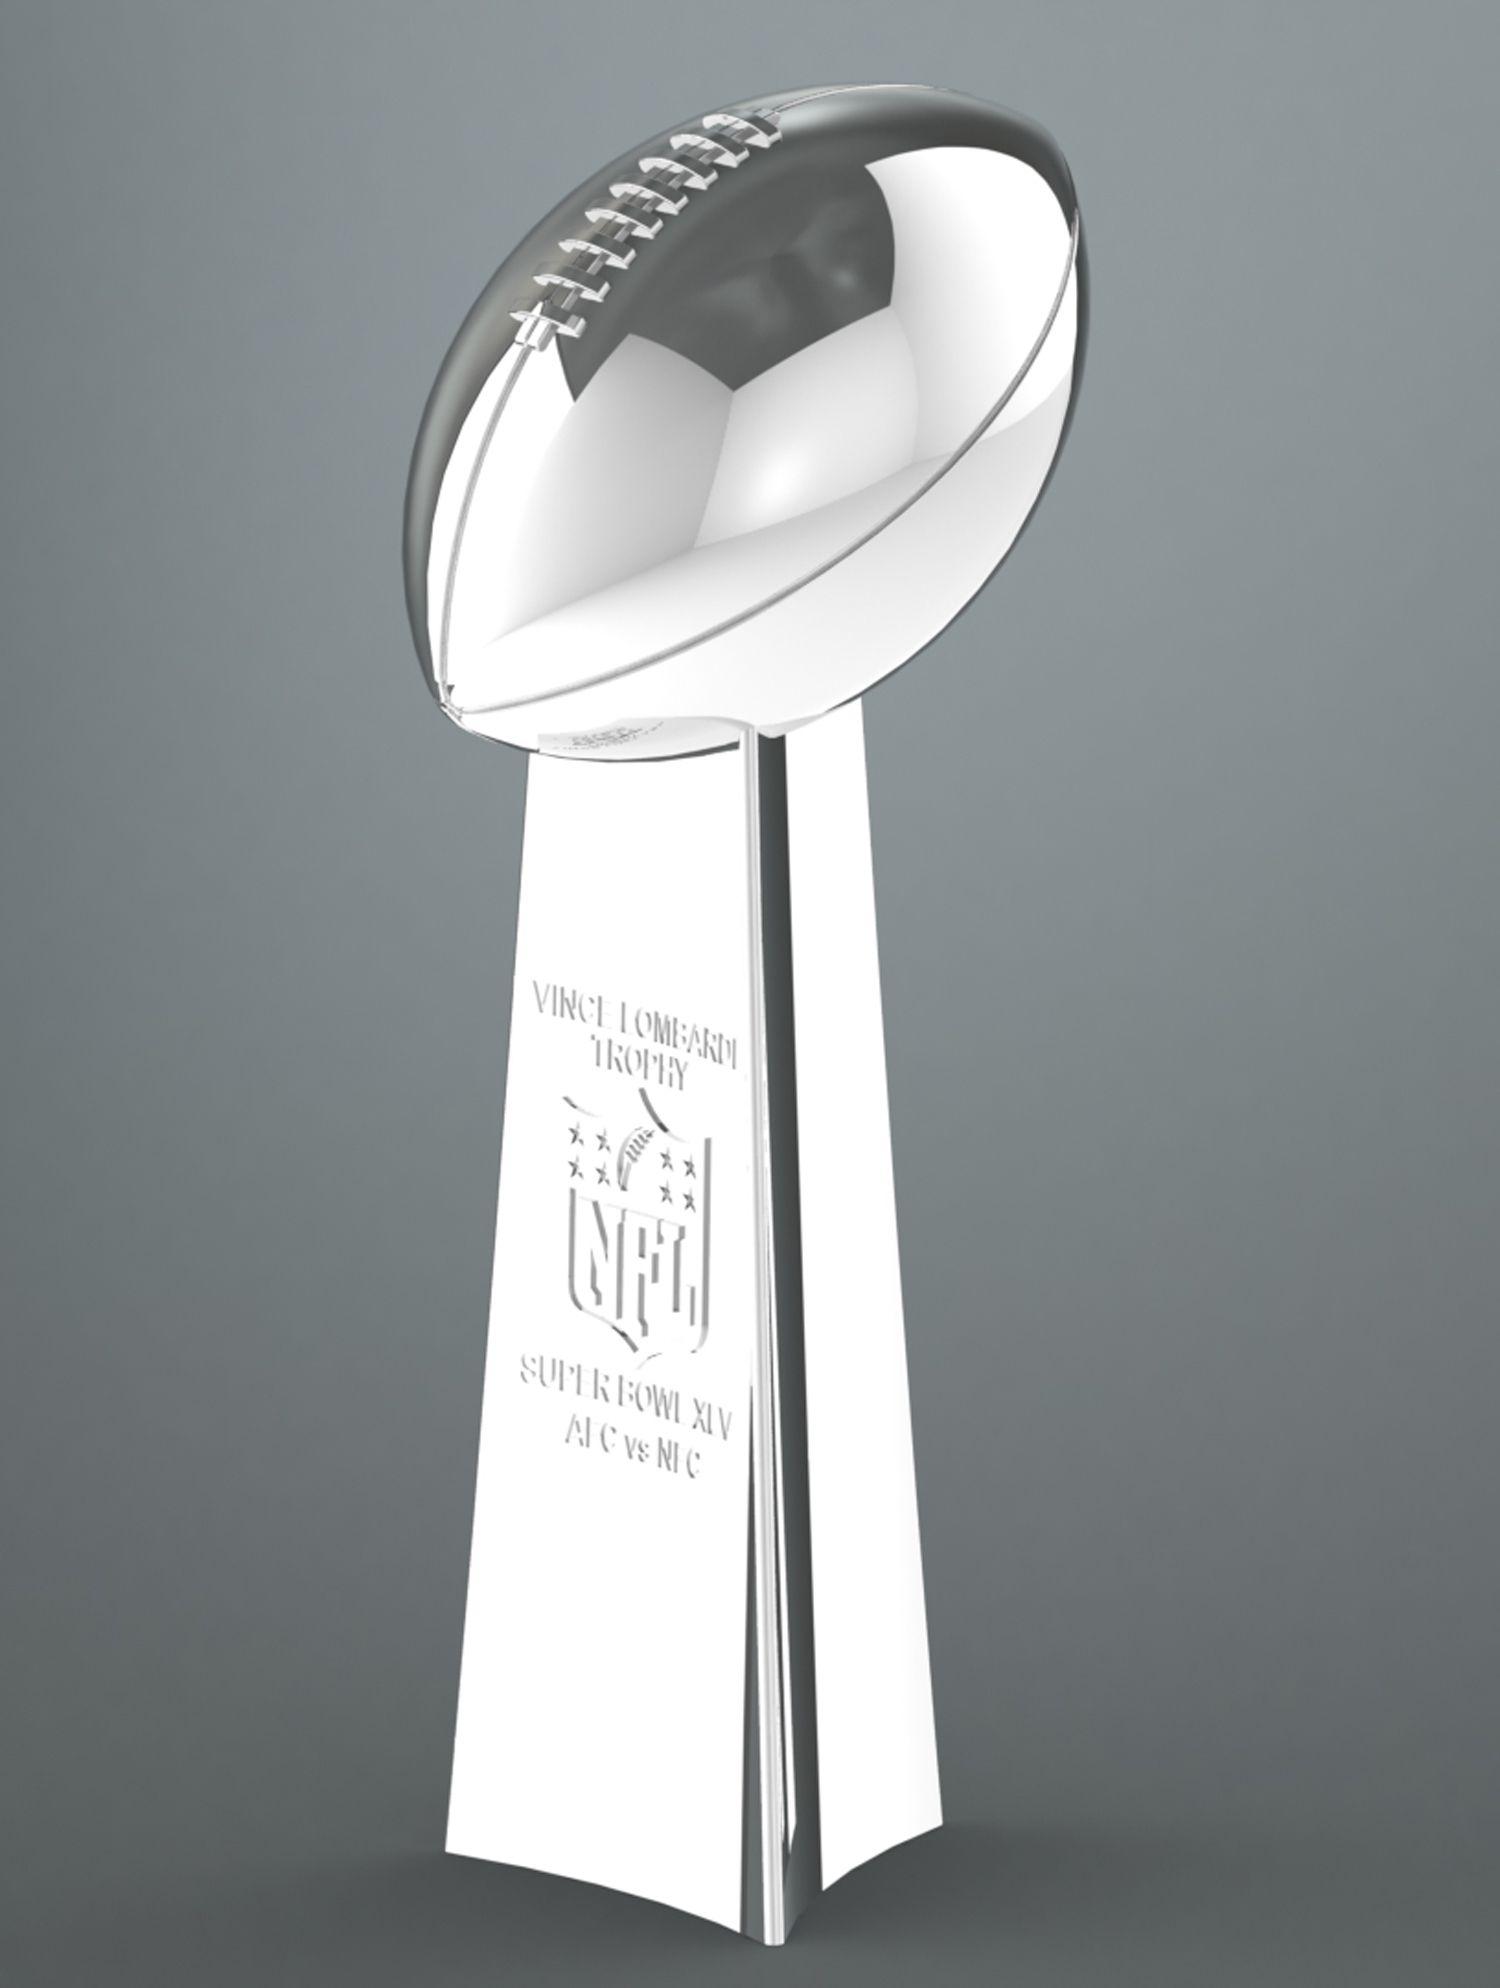 Pictures Of The Super Bowl Trophy Wallpapers